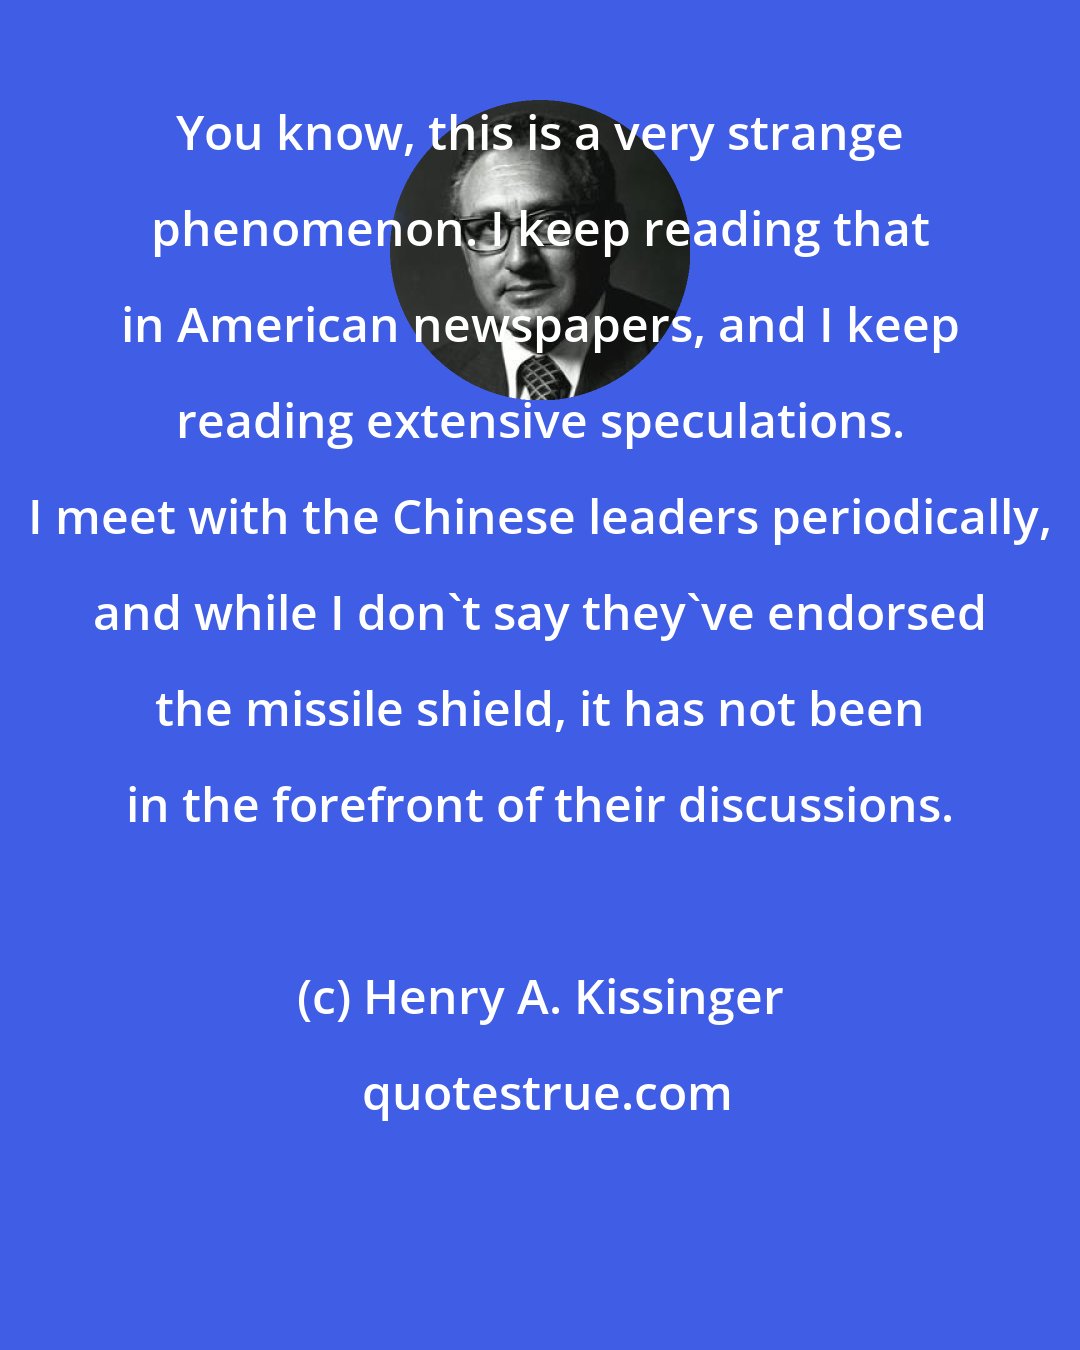 Henry A. Kissinger: You know, this is a very strange phenomenon. I keep reading that in American newspapers, and I keep reading extensive speculations. I meet with the Chinese leaders periodically, and while I don't say they've endorsed the missile shield, it has not been in the forefront of their discussions.